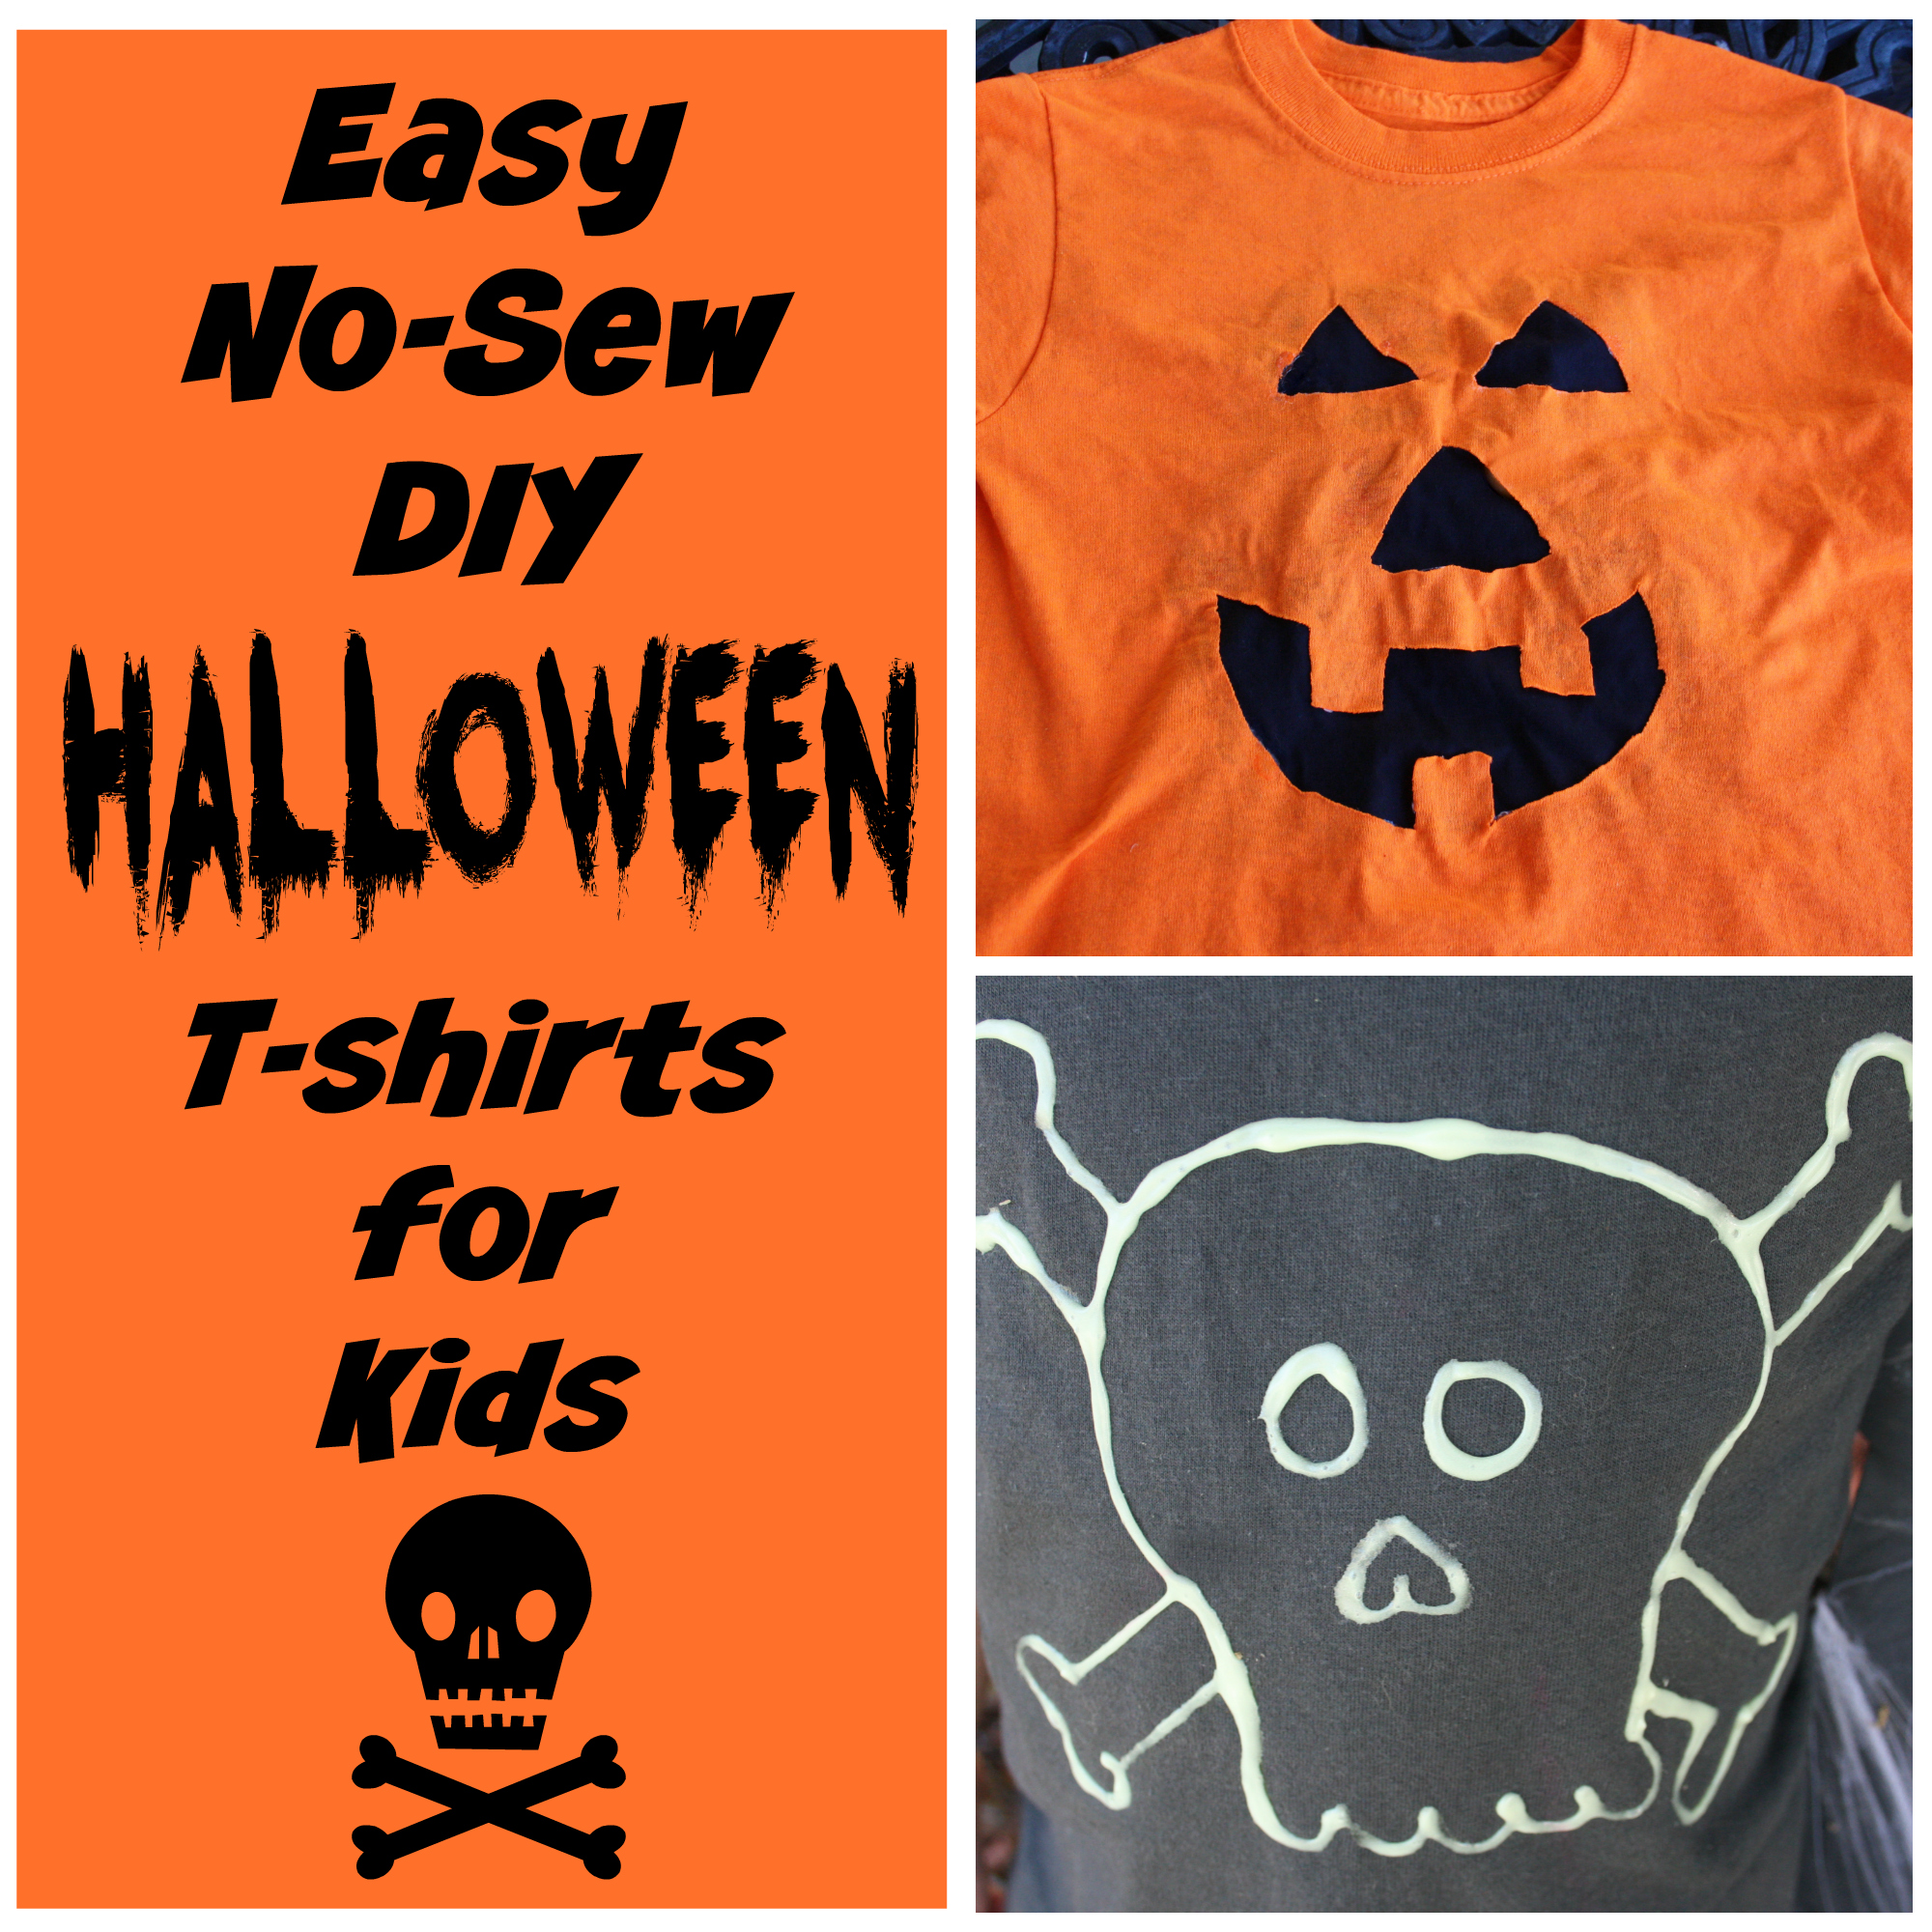 Two DIY Halloween T-shirts for Kids - Run DMT